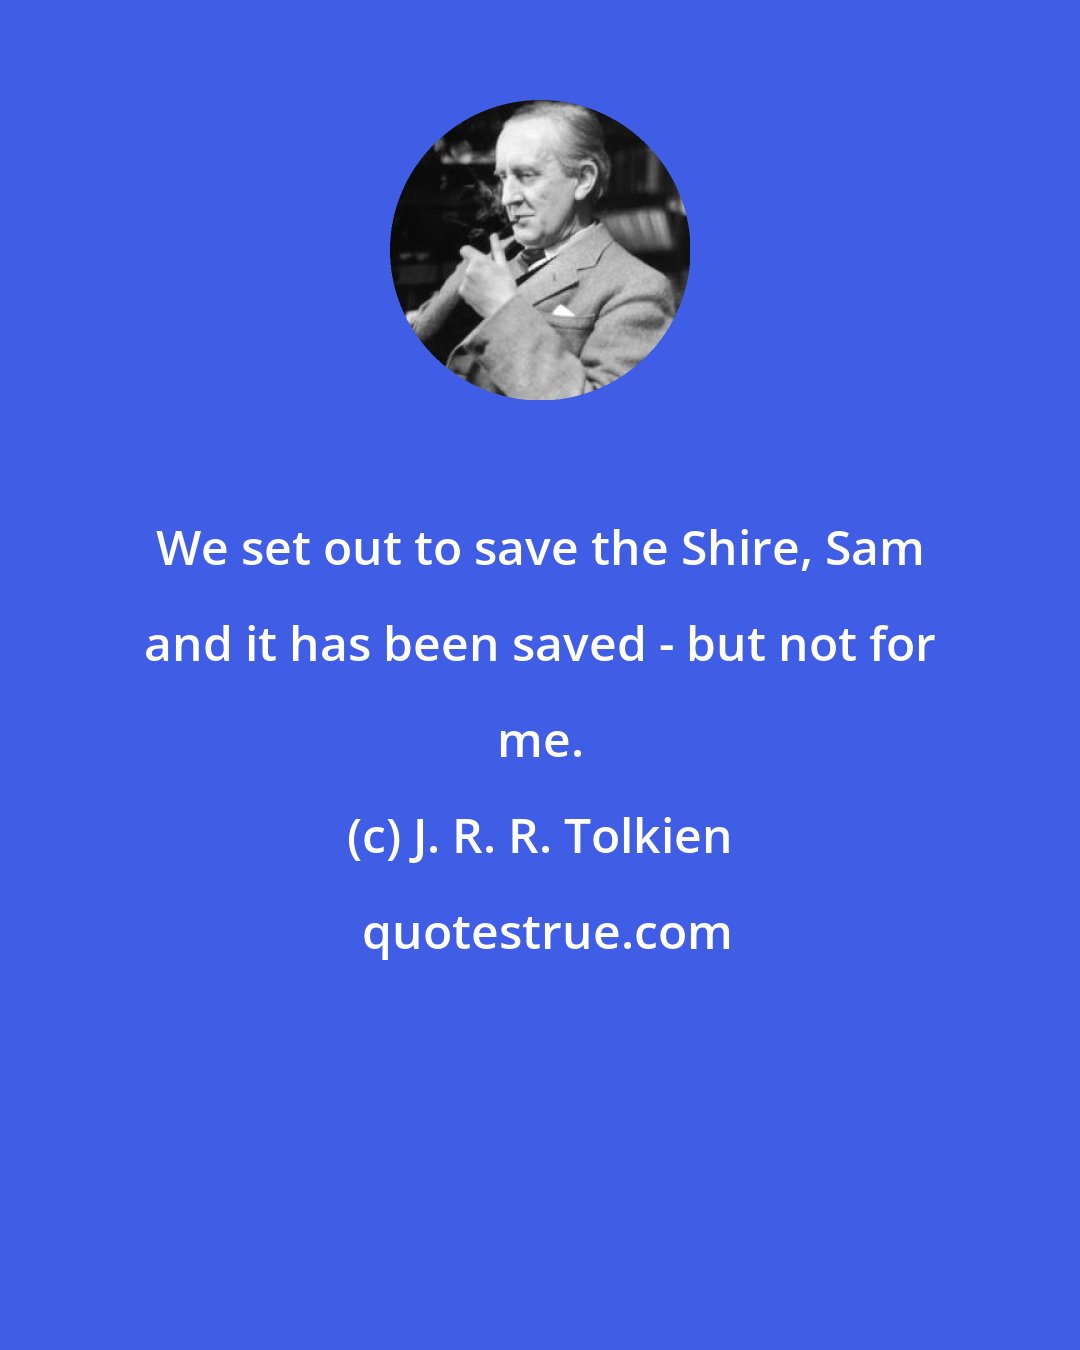 J. R. R. Tolkien: We set out to save the Shire, Sam and it has been saved - but not for me.